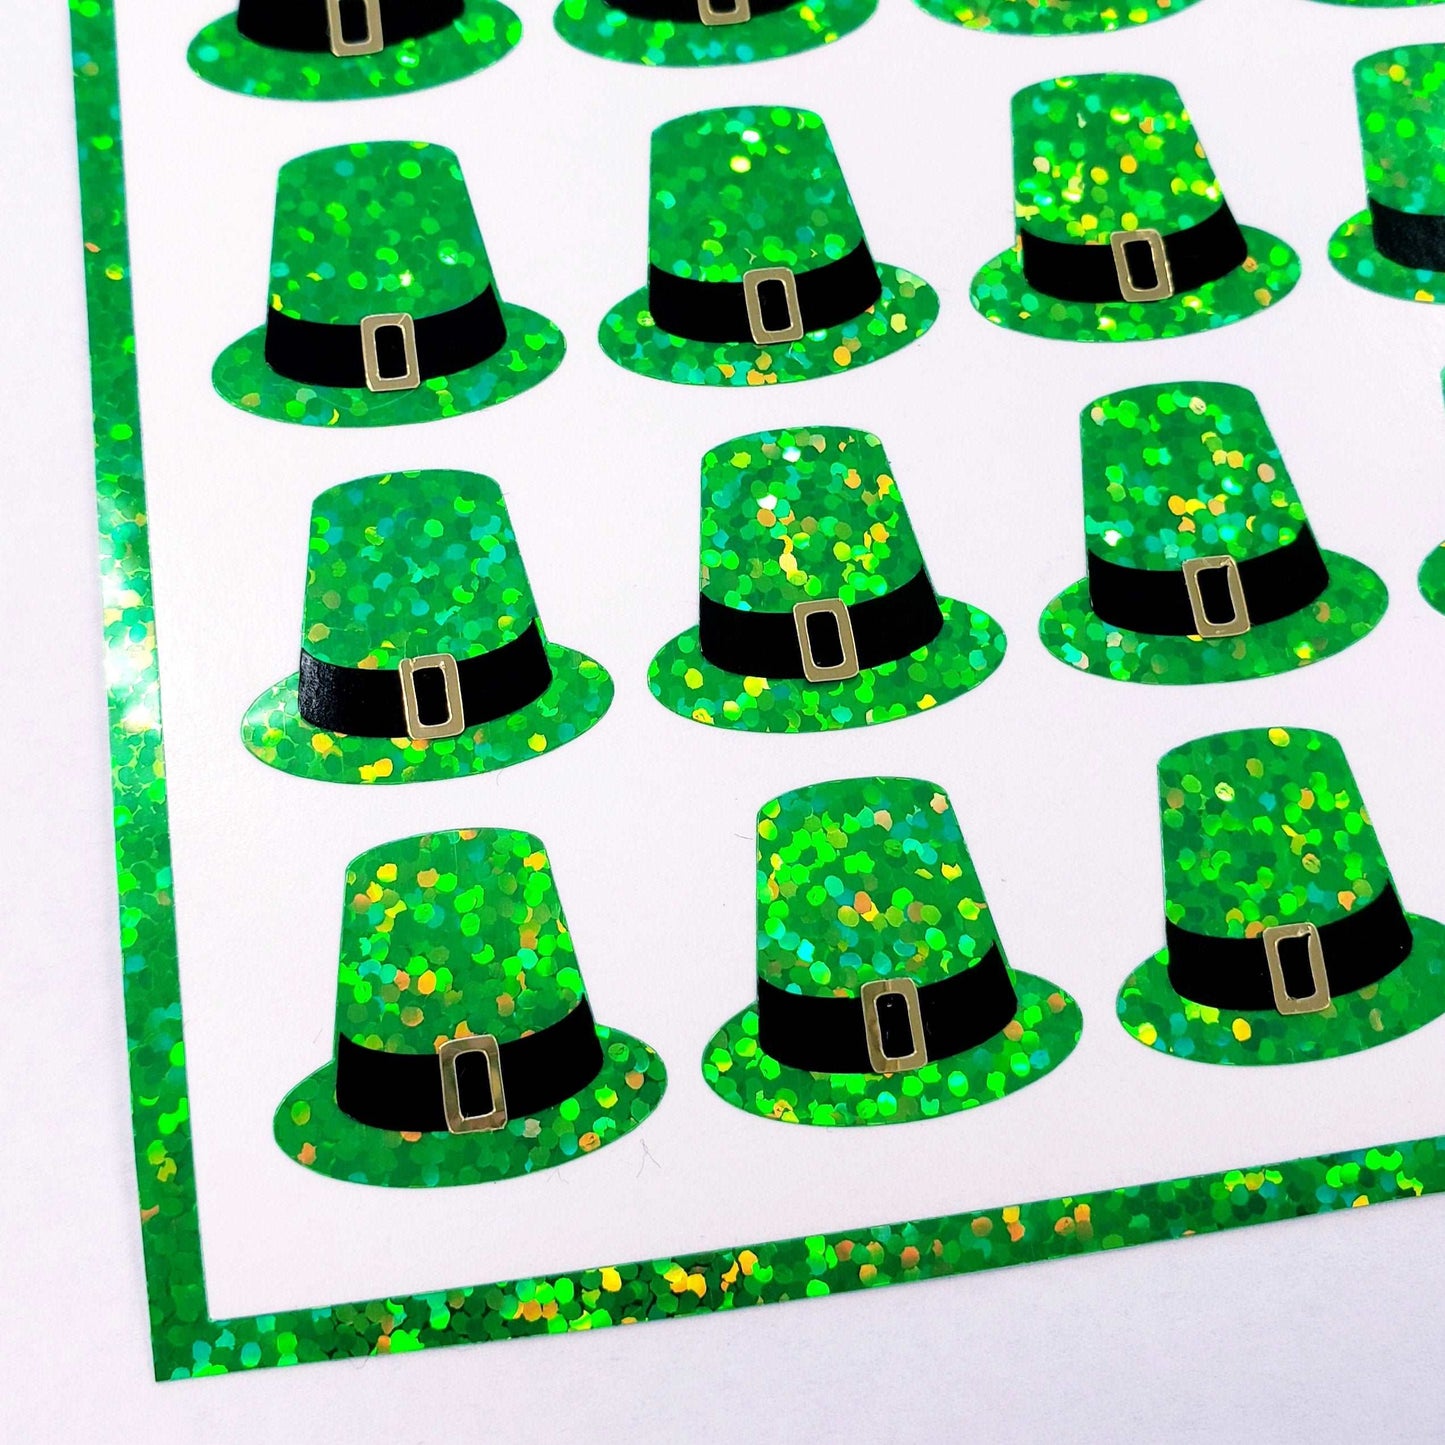 Leprechaun Hat Stickers, set of 35 green St. Patrick's Day hat glitter stickers for cards, envelopes, March calendars and craft projects.